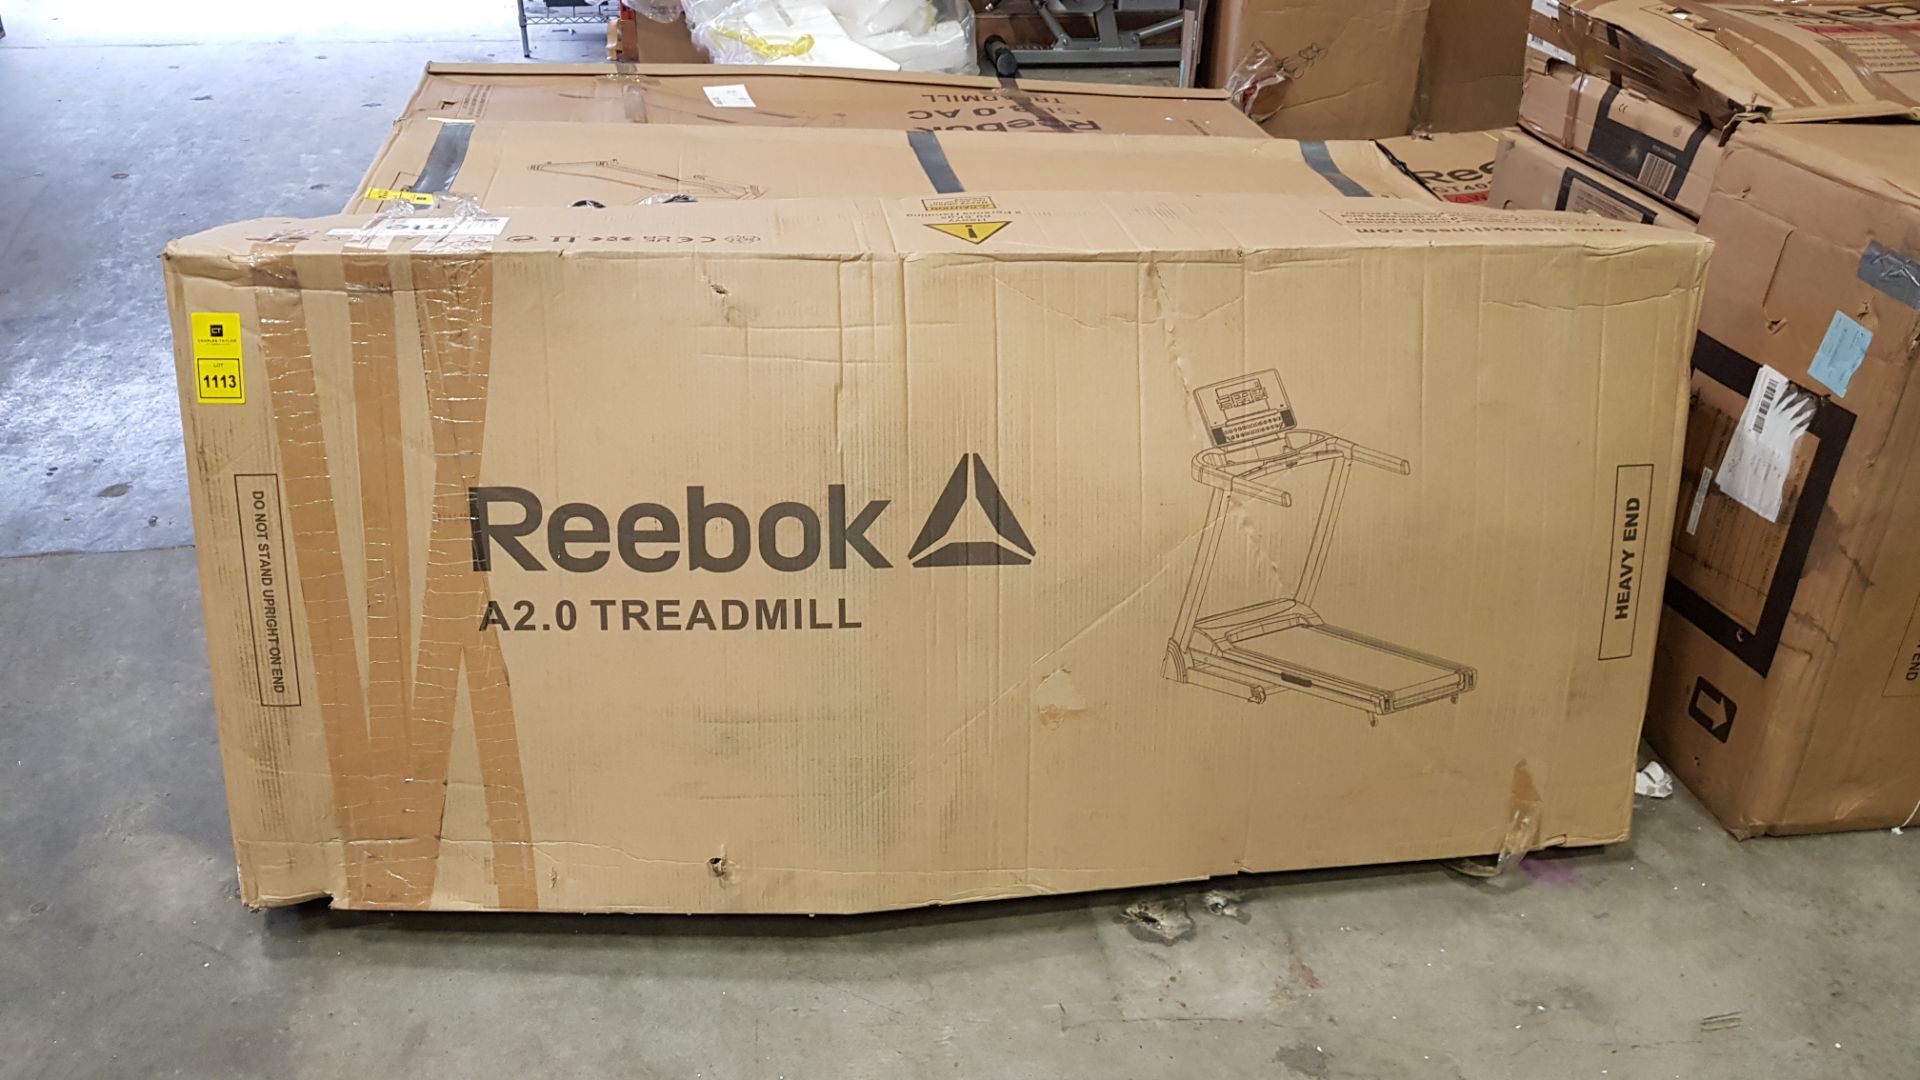 1 X BOXED REEBOK A2.0 TREADMILL IN SILVER - IN 1 BOX ( PLEASE NOTE CUSTOMER RETURN AND DAMAGE ON BOX - Image 2 of 2